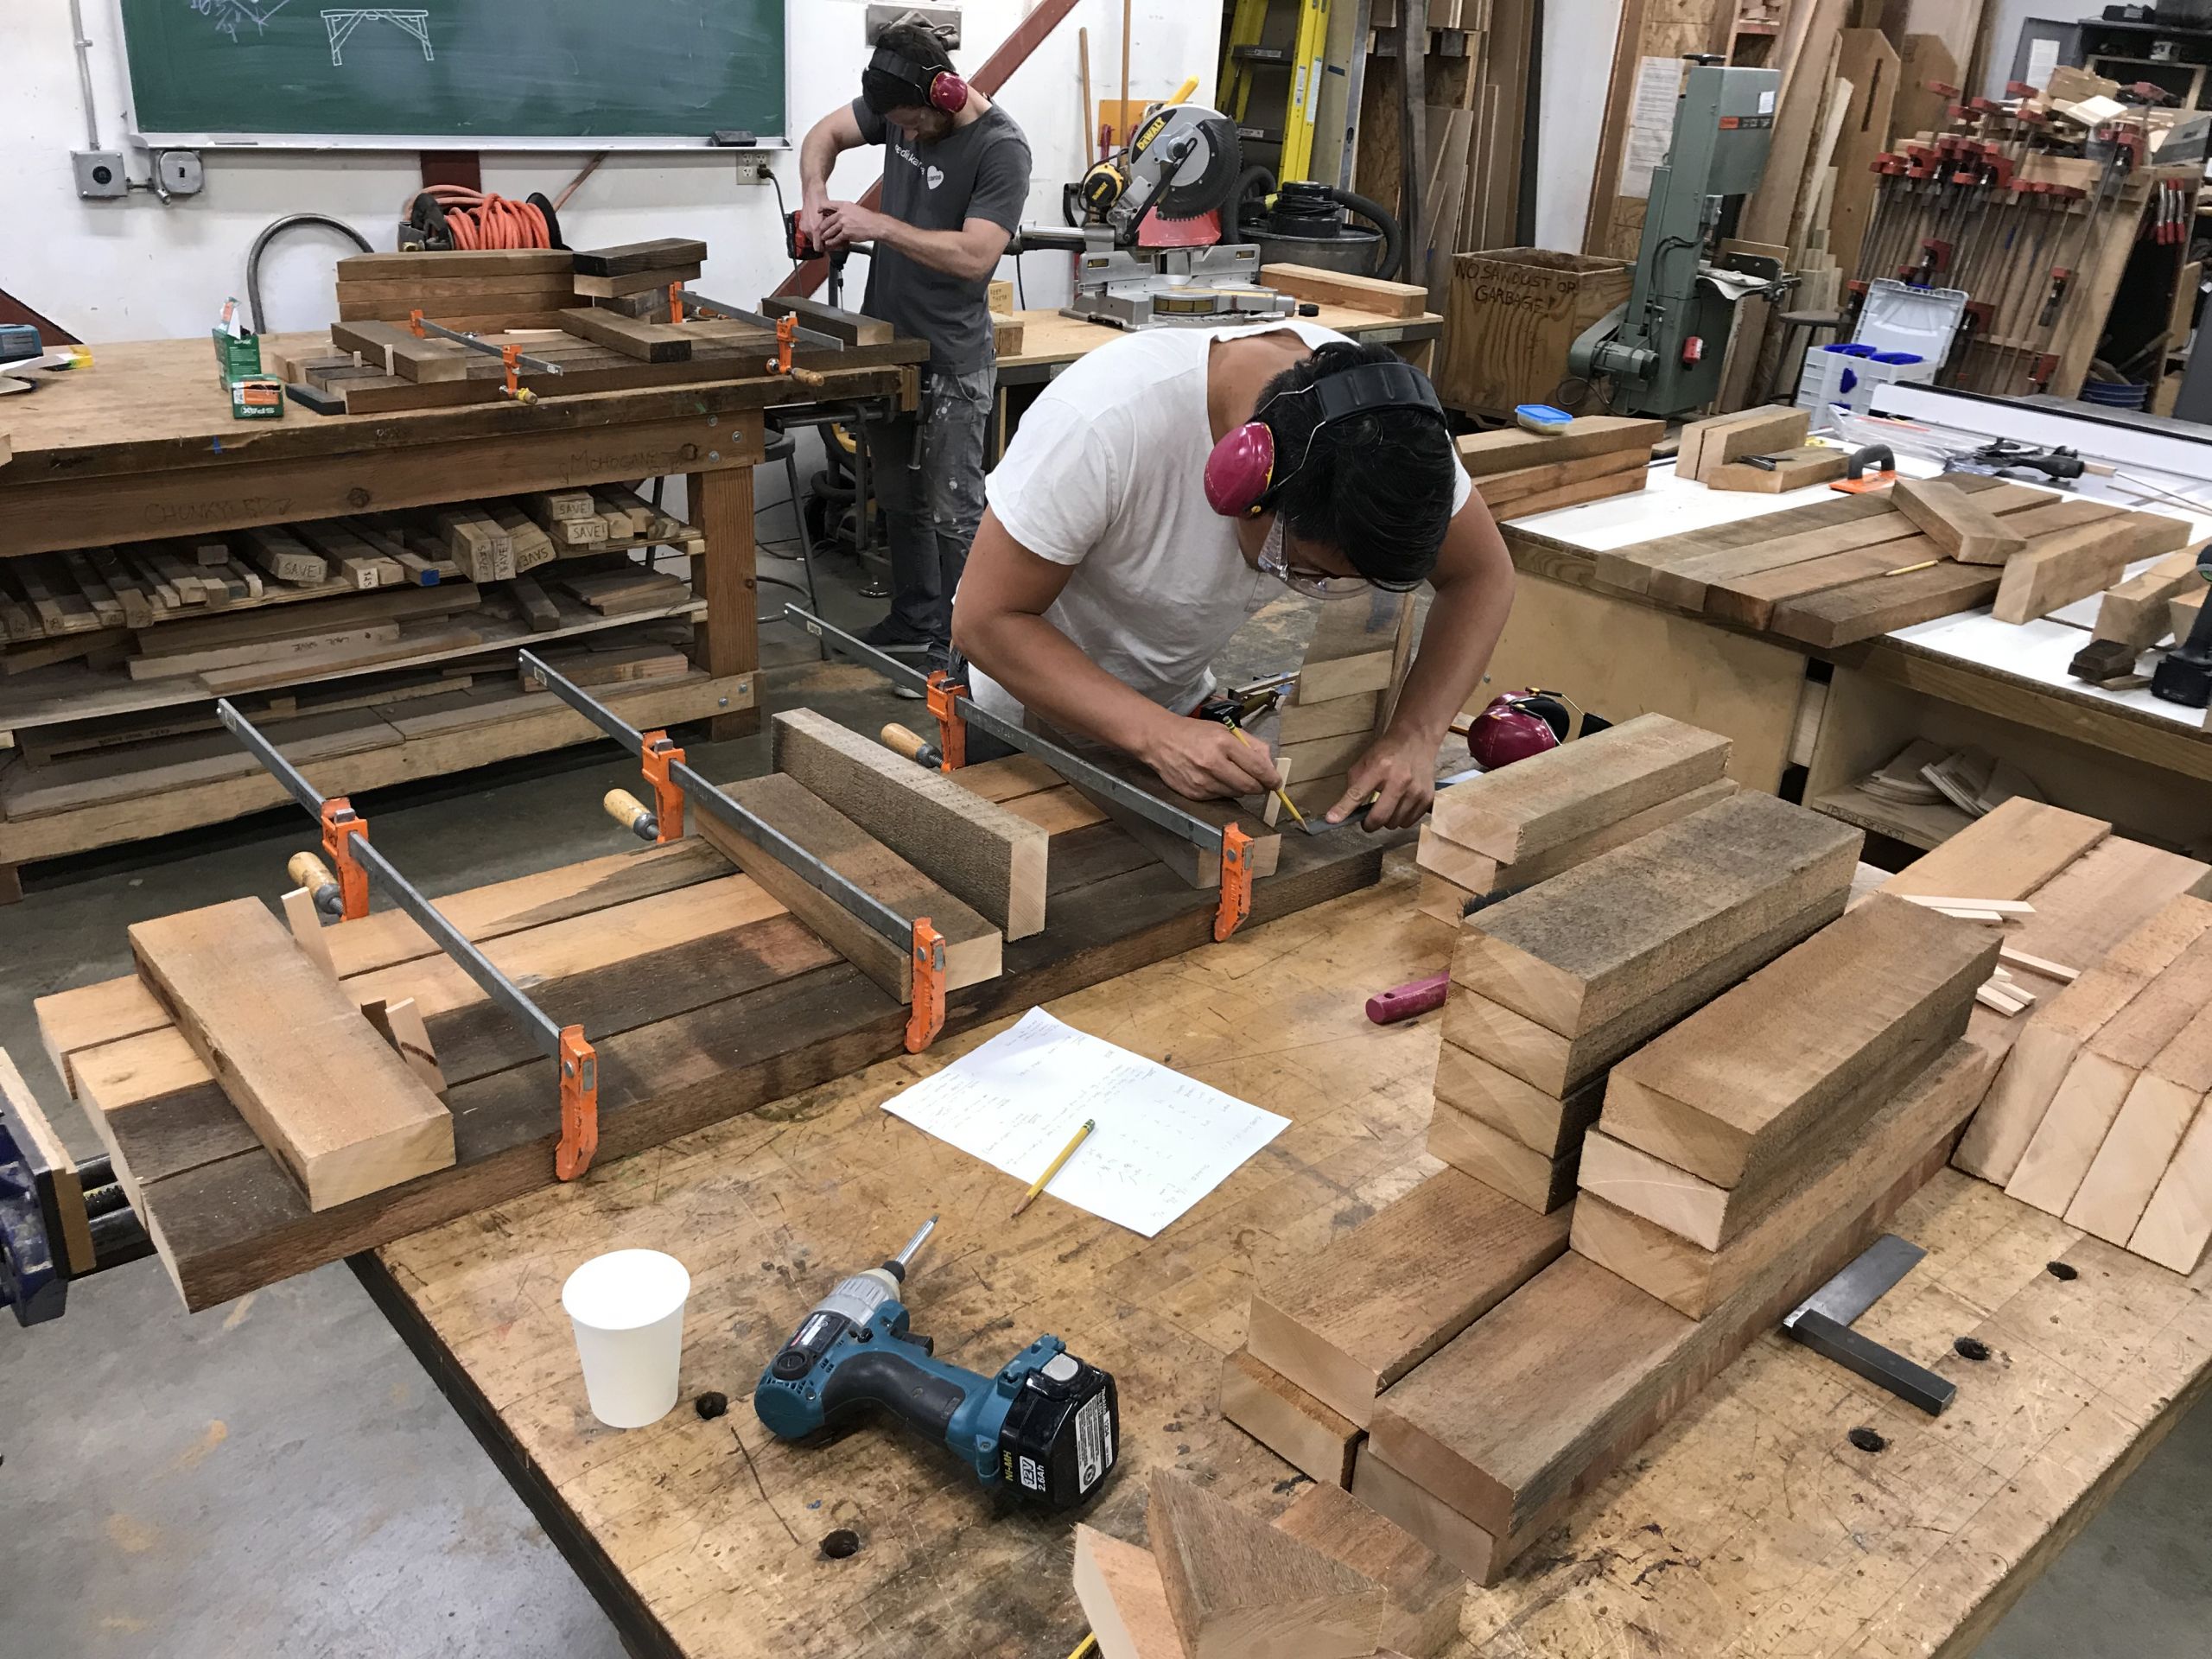 what do you learn in woodwork? 2